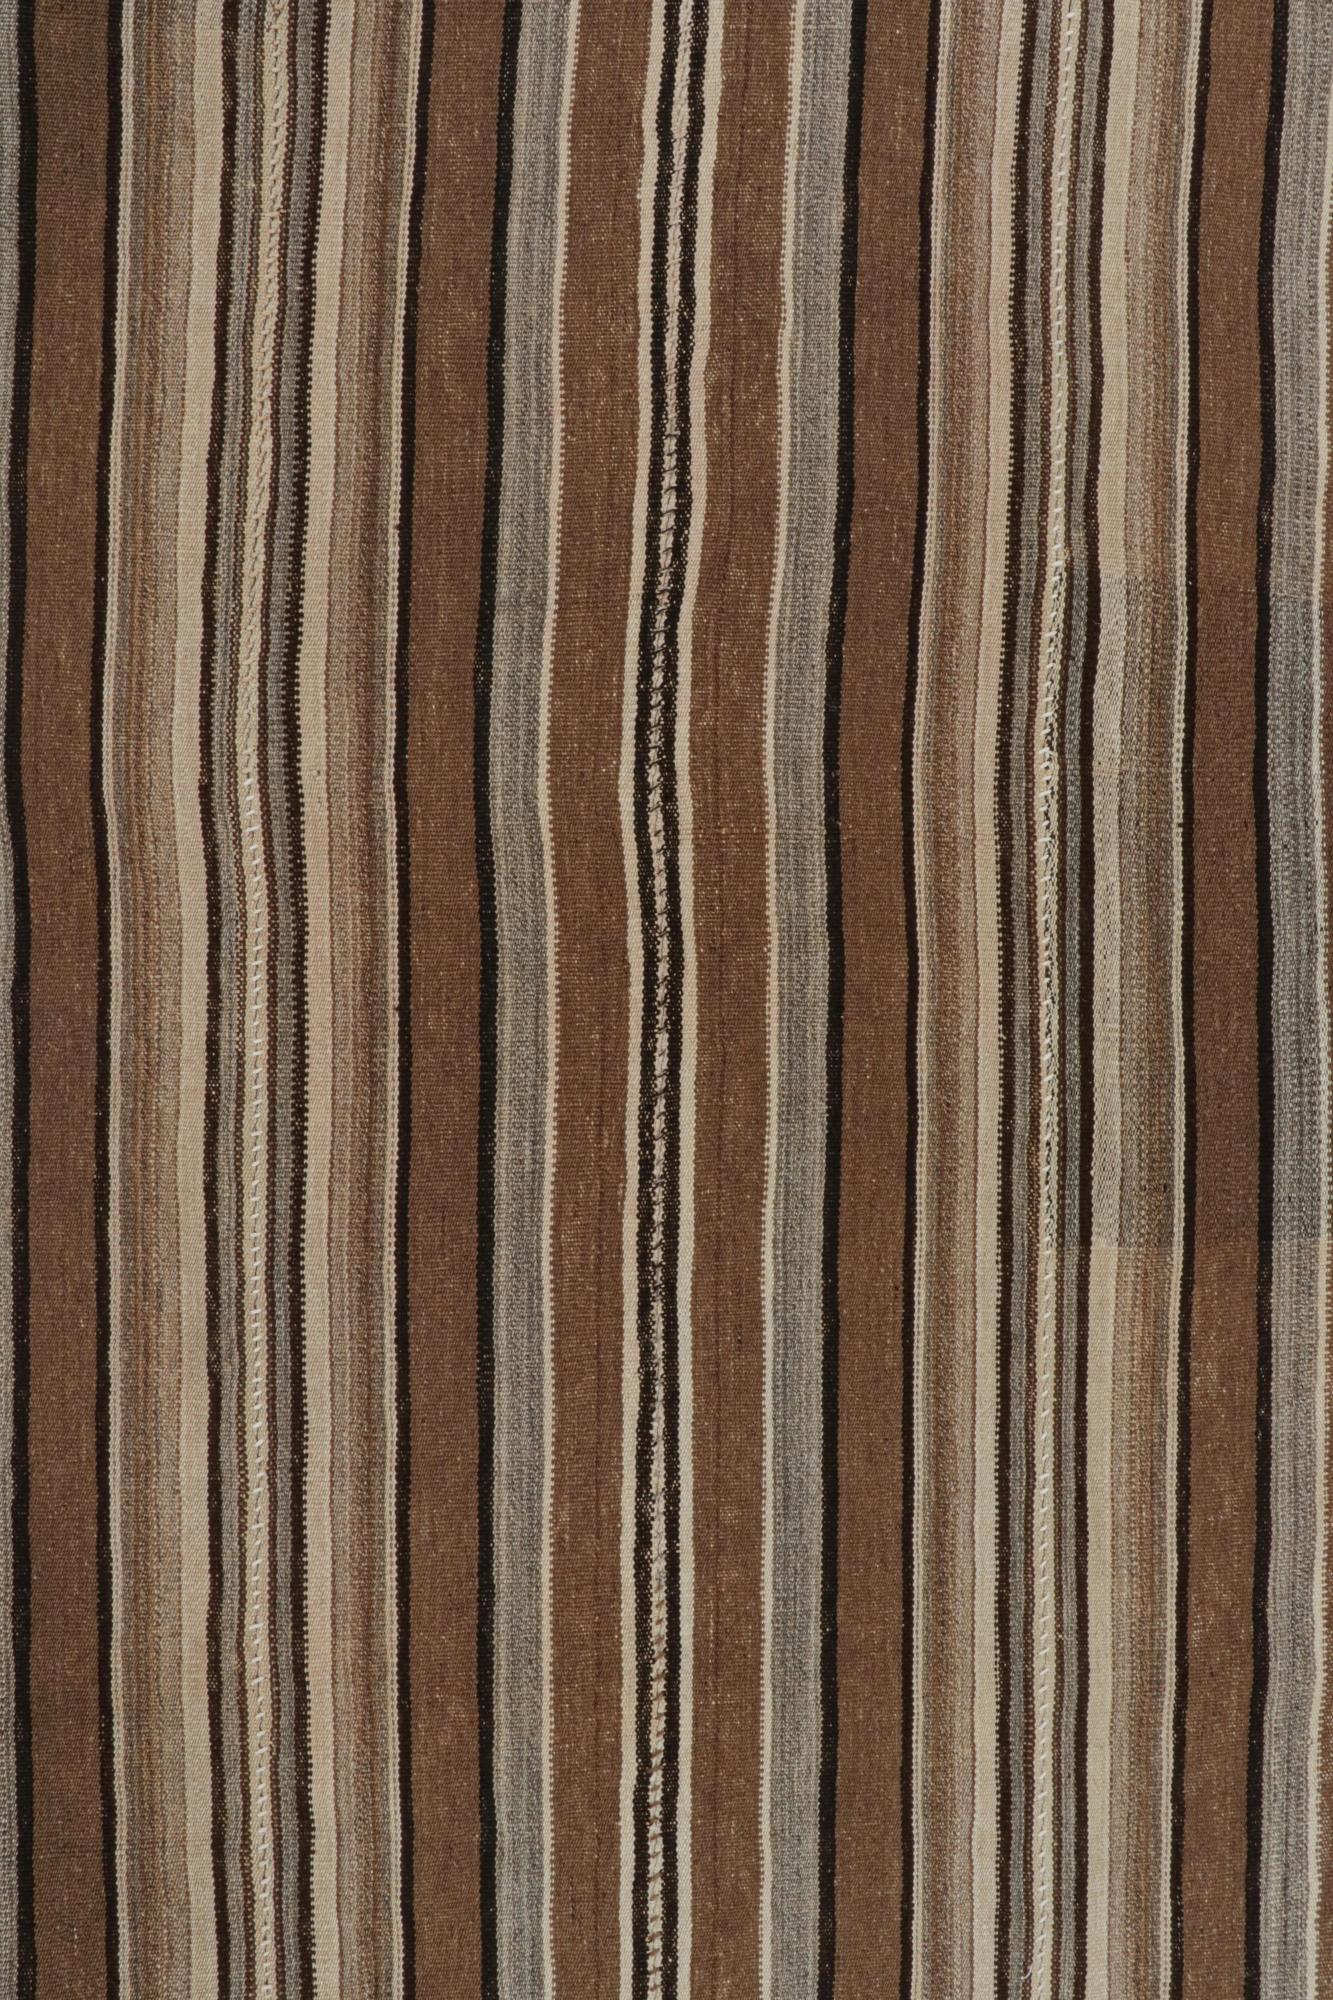 Mid-20th Century Vintage Persian Kilim in Beige-Brown and Gray Stripes For Sale